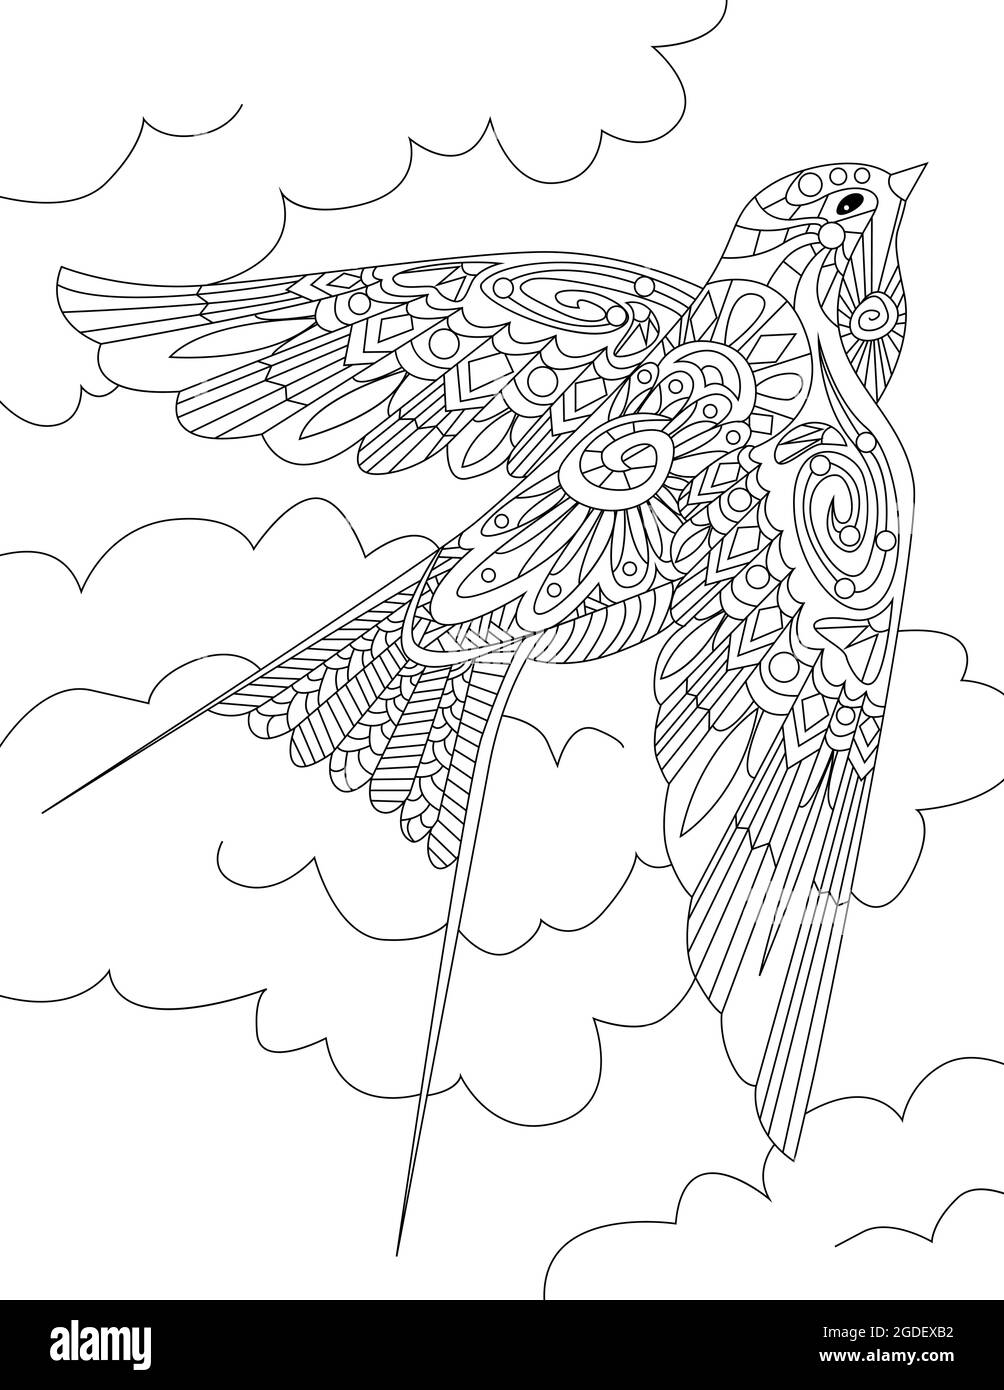 Small Bird Flying Through The Skies With Clouds Colorless Line ...